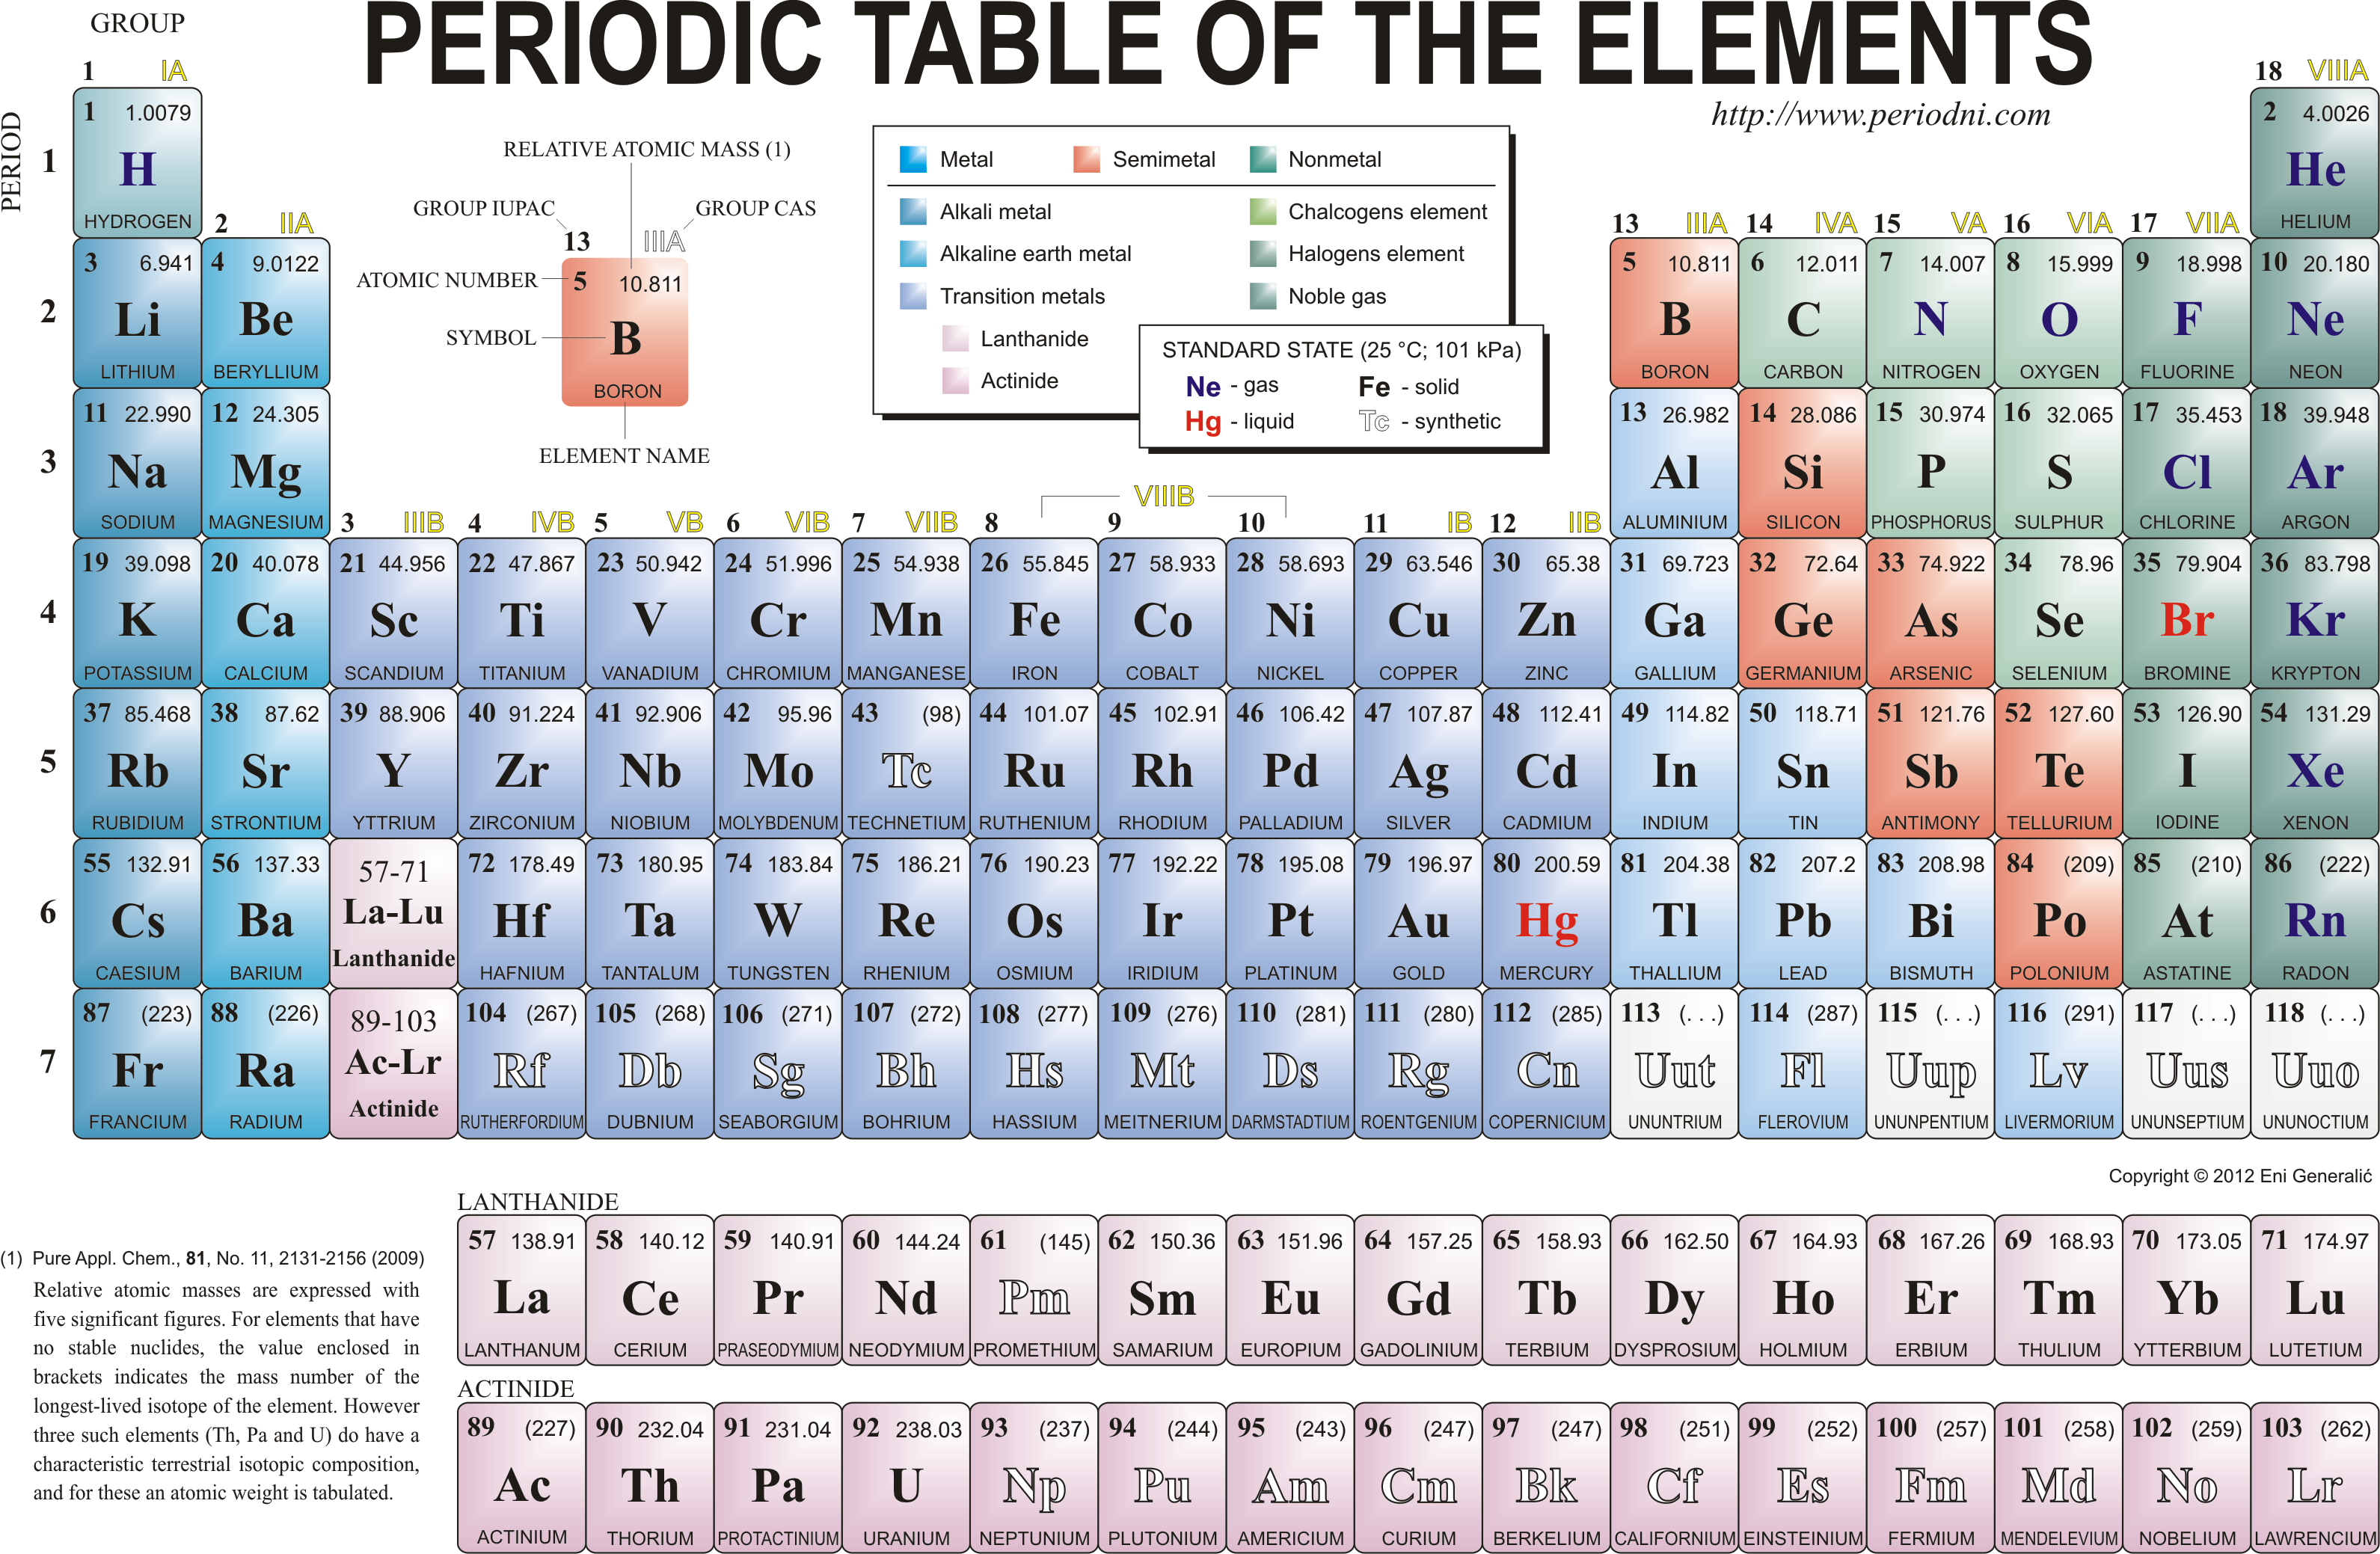 element table.